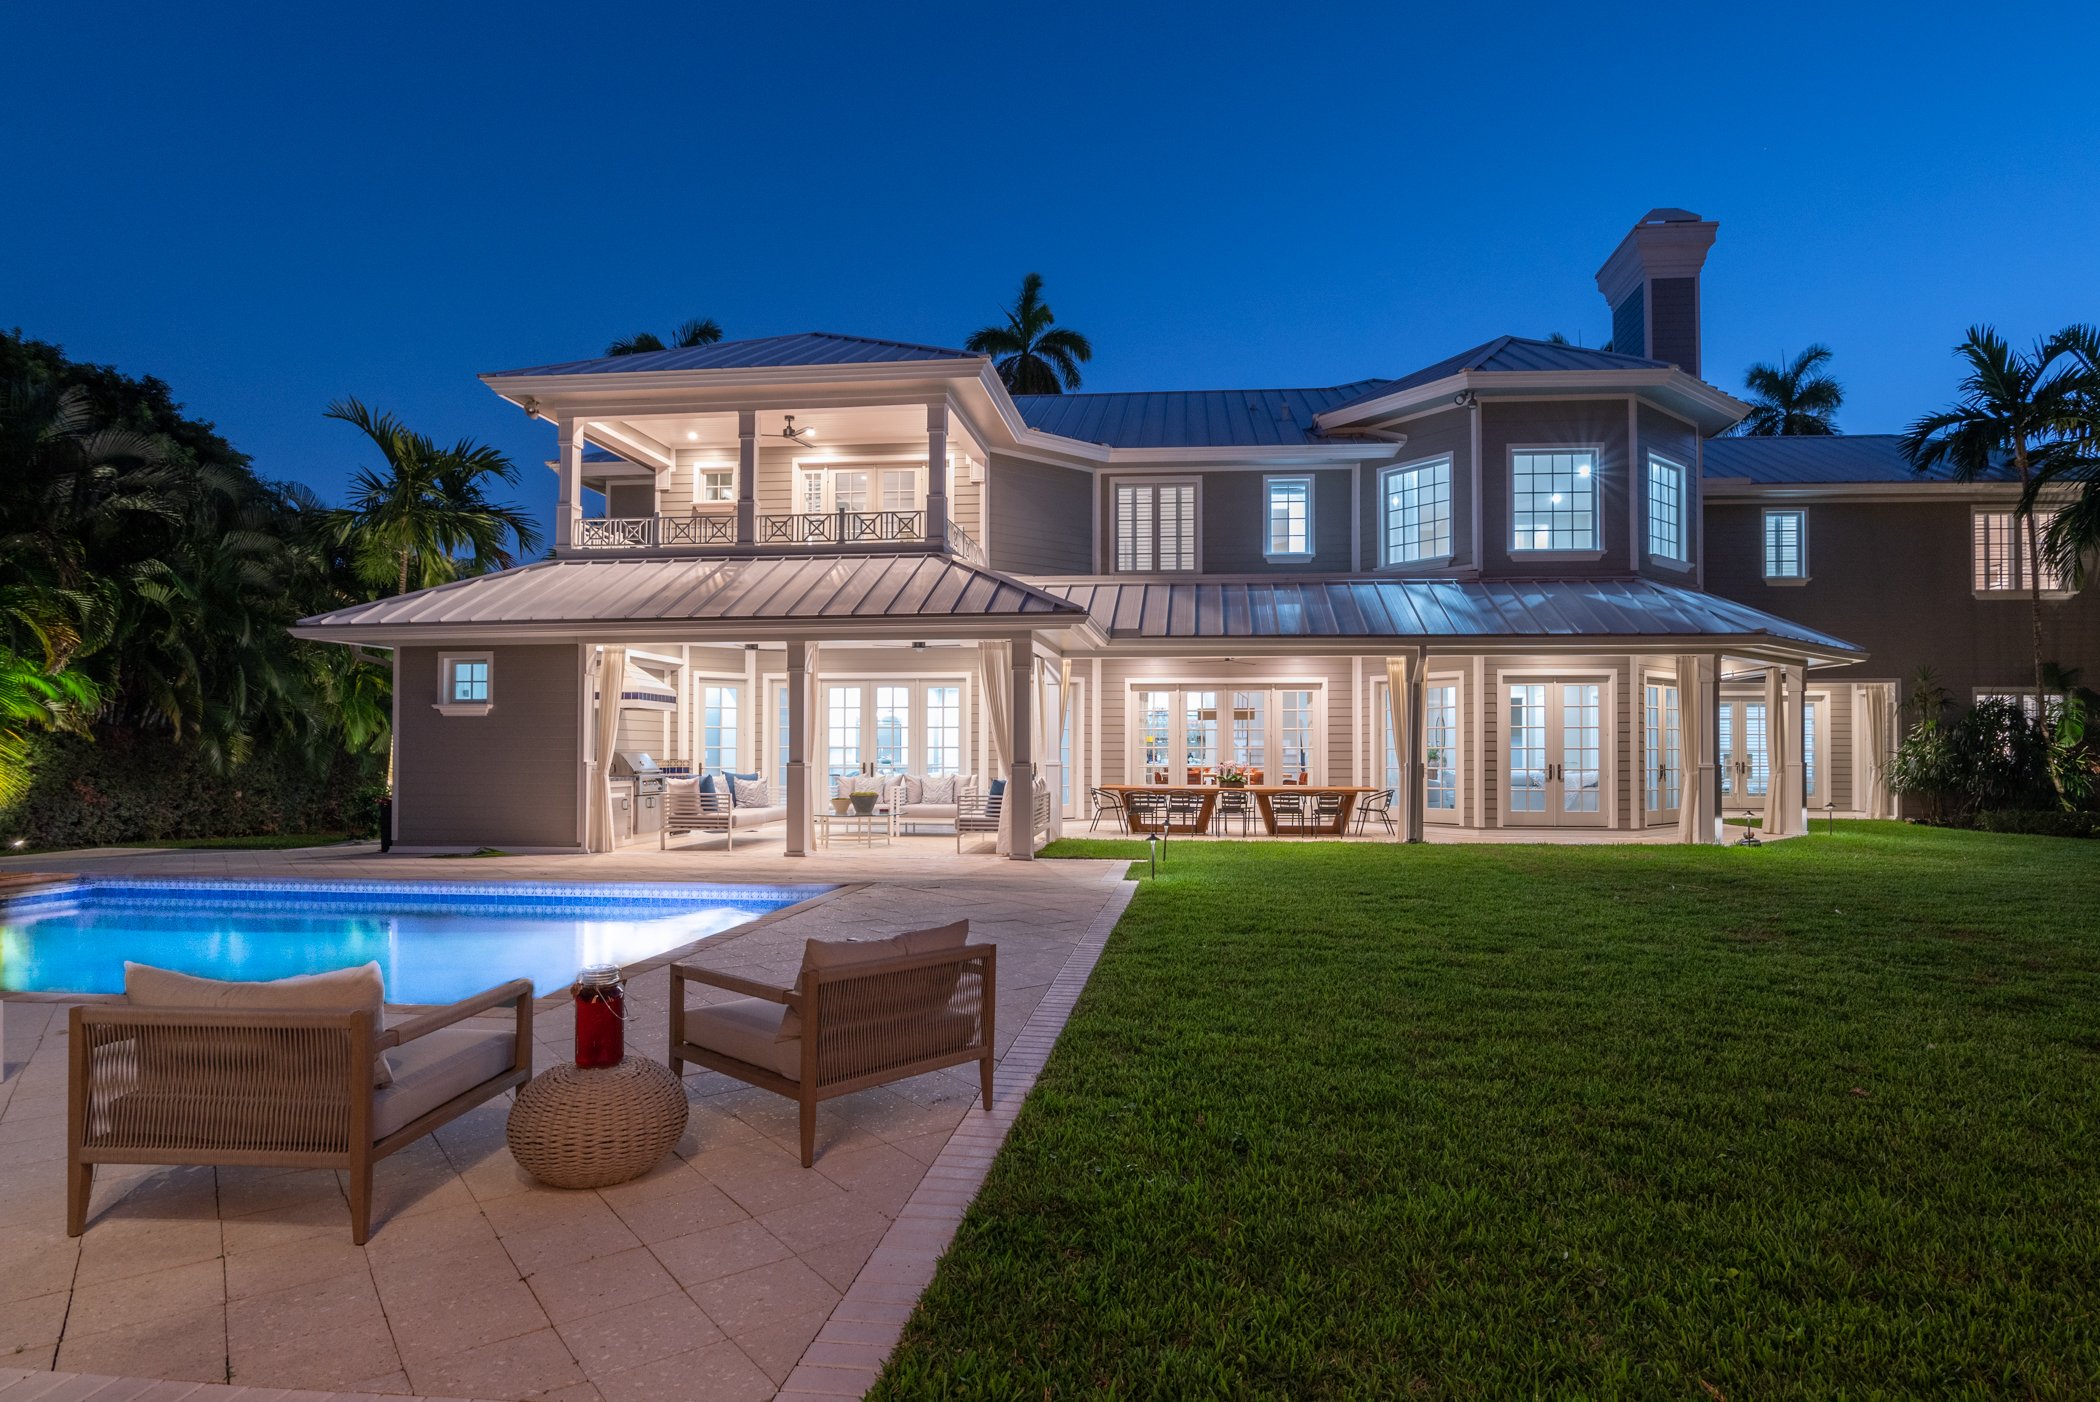 Check Out This Newly Renovated Coastal Contemporary In The Exclusive Point Manalapan Which Just Listed For $7.995 Million 127.jpg